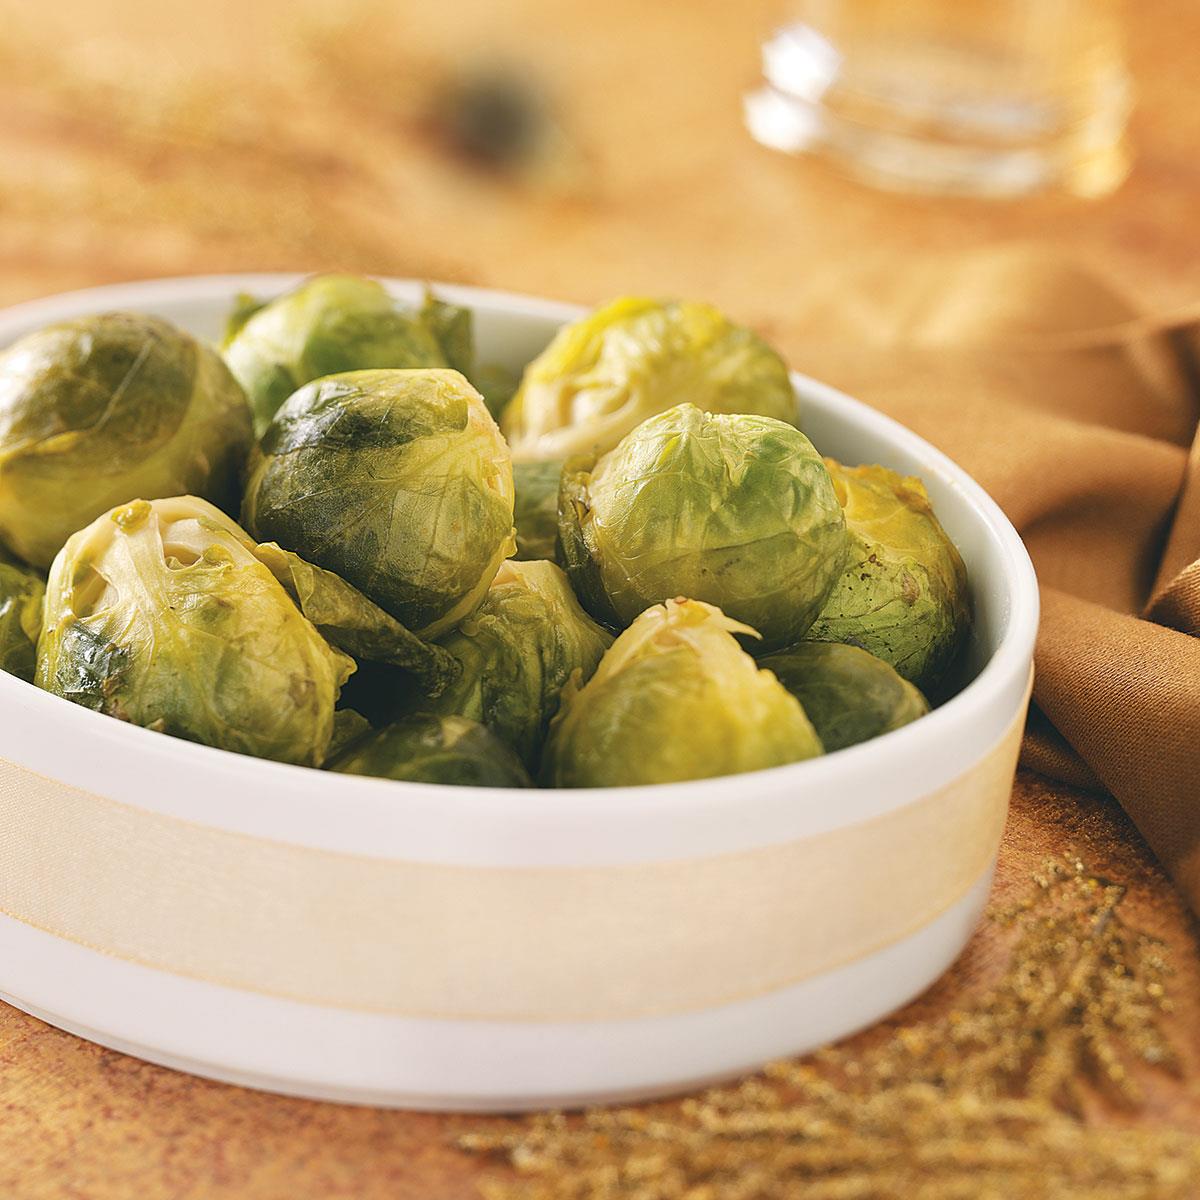 Maple-Dijon Glazed Brussels Sprouts image